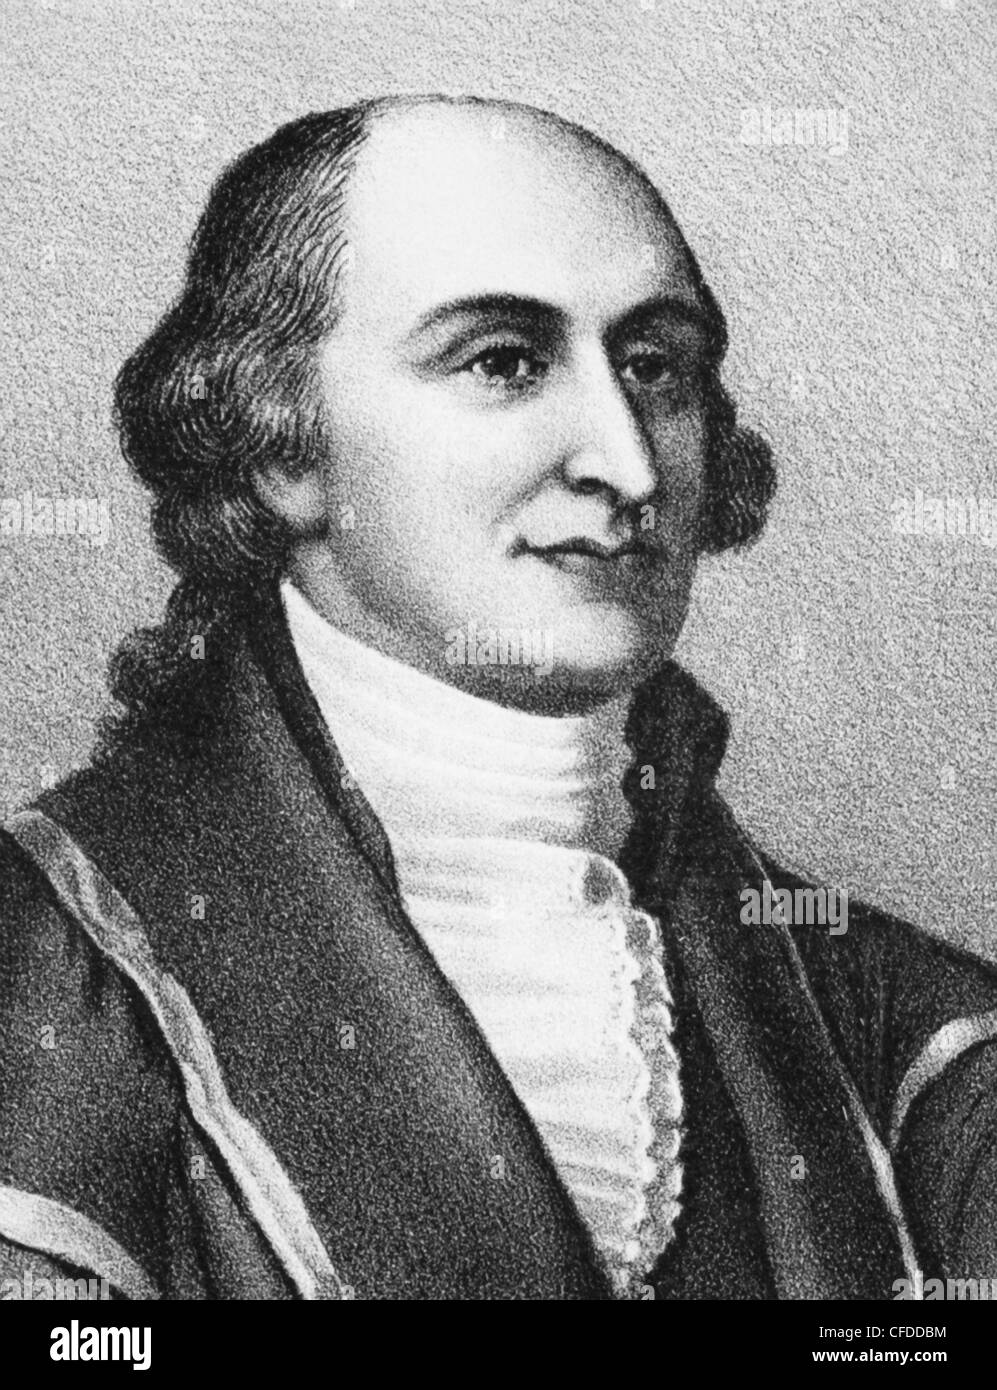 Vintage portrait print of American statesman, diplomat and lawyer John Jay (1745 - 1829) - the first US Chief Justice (1789 - 1795). Stock Photo